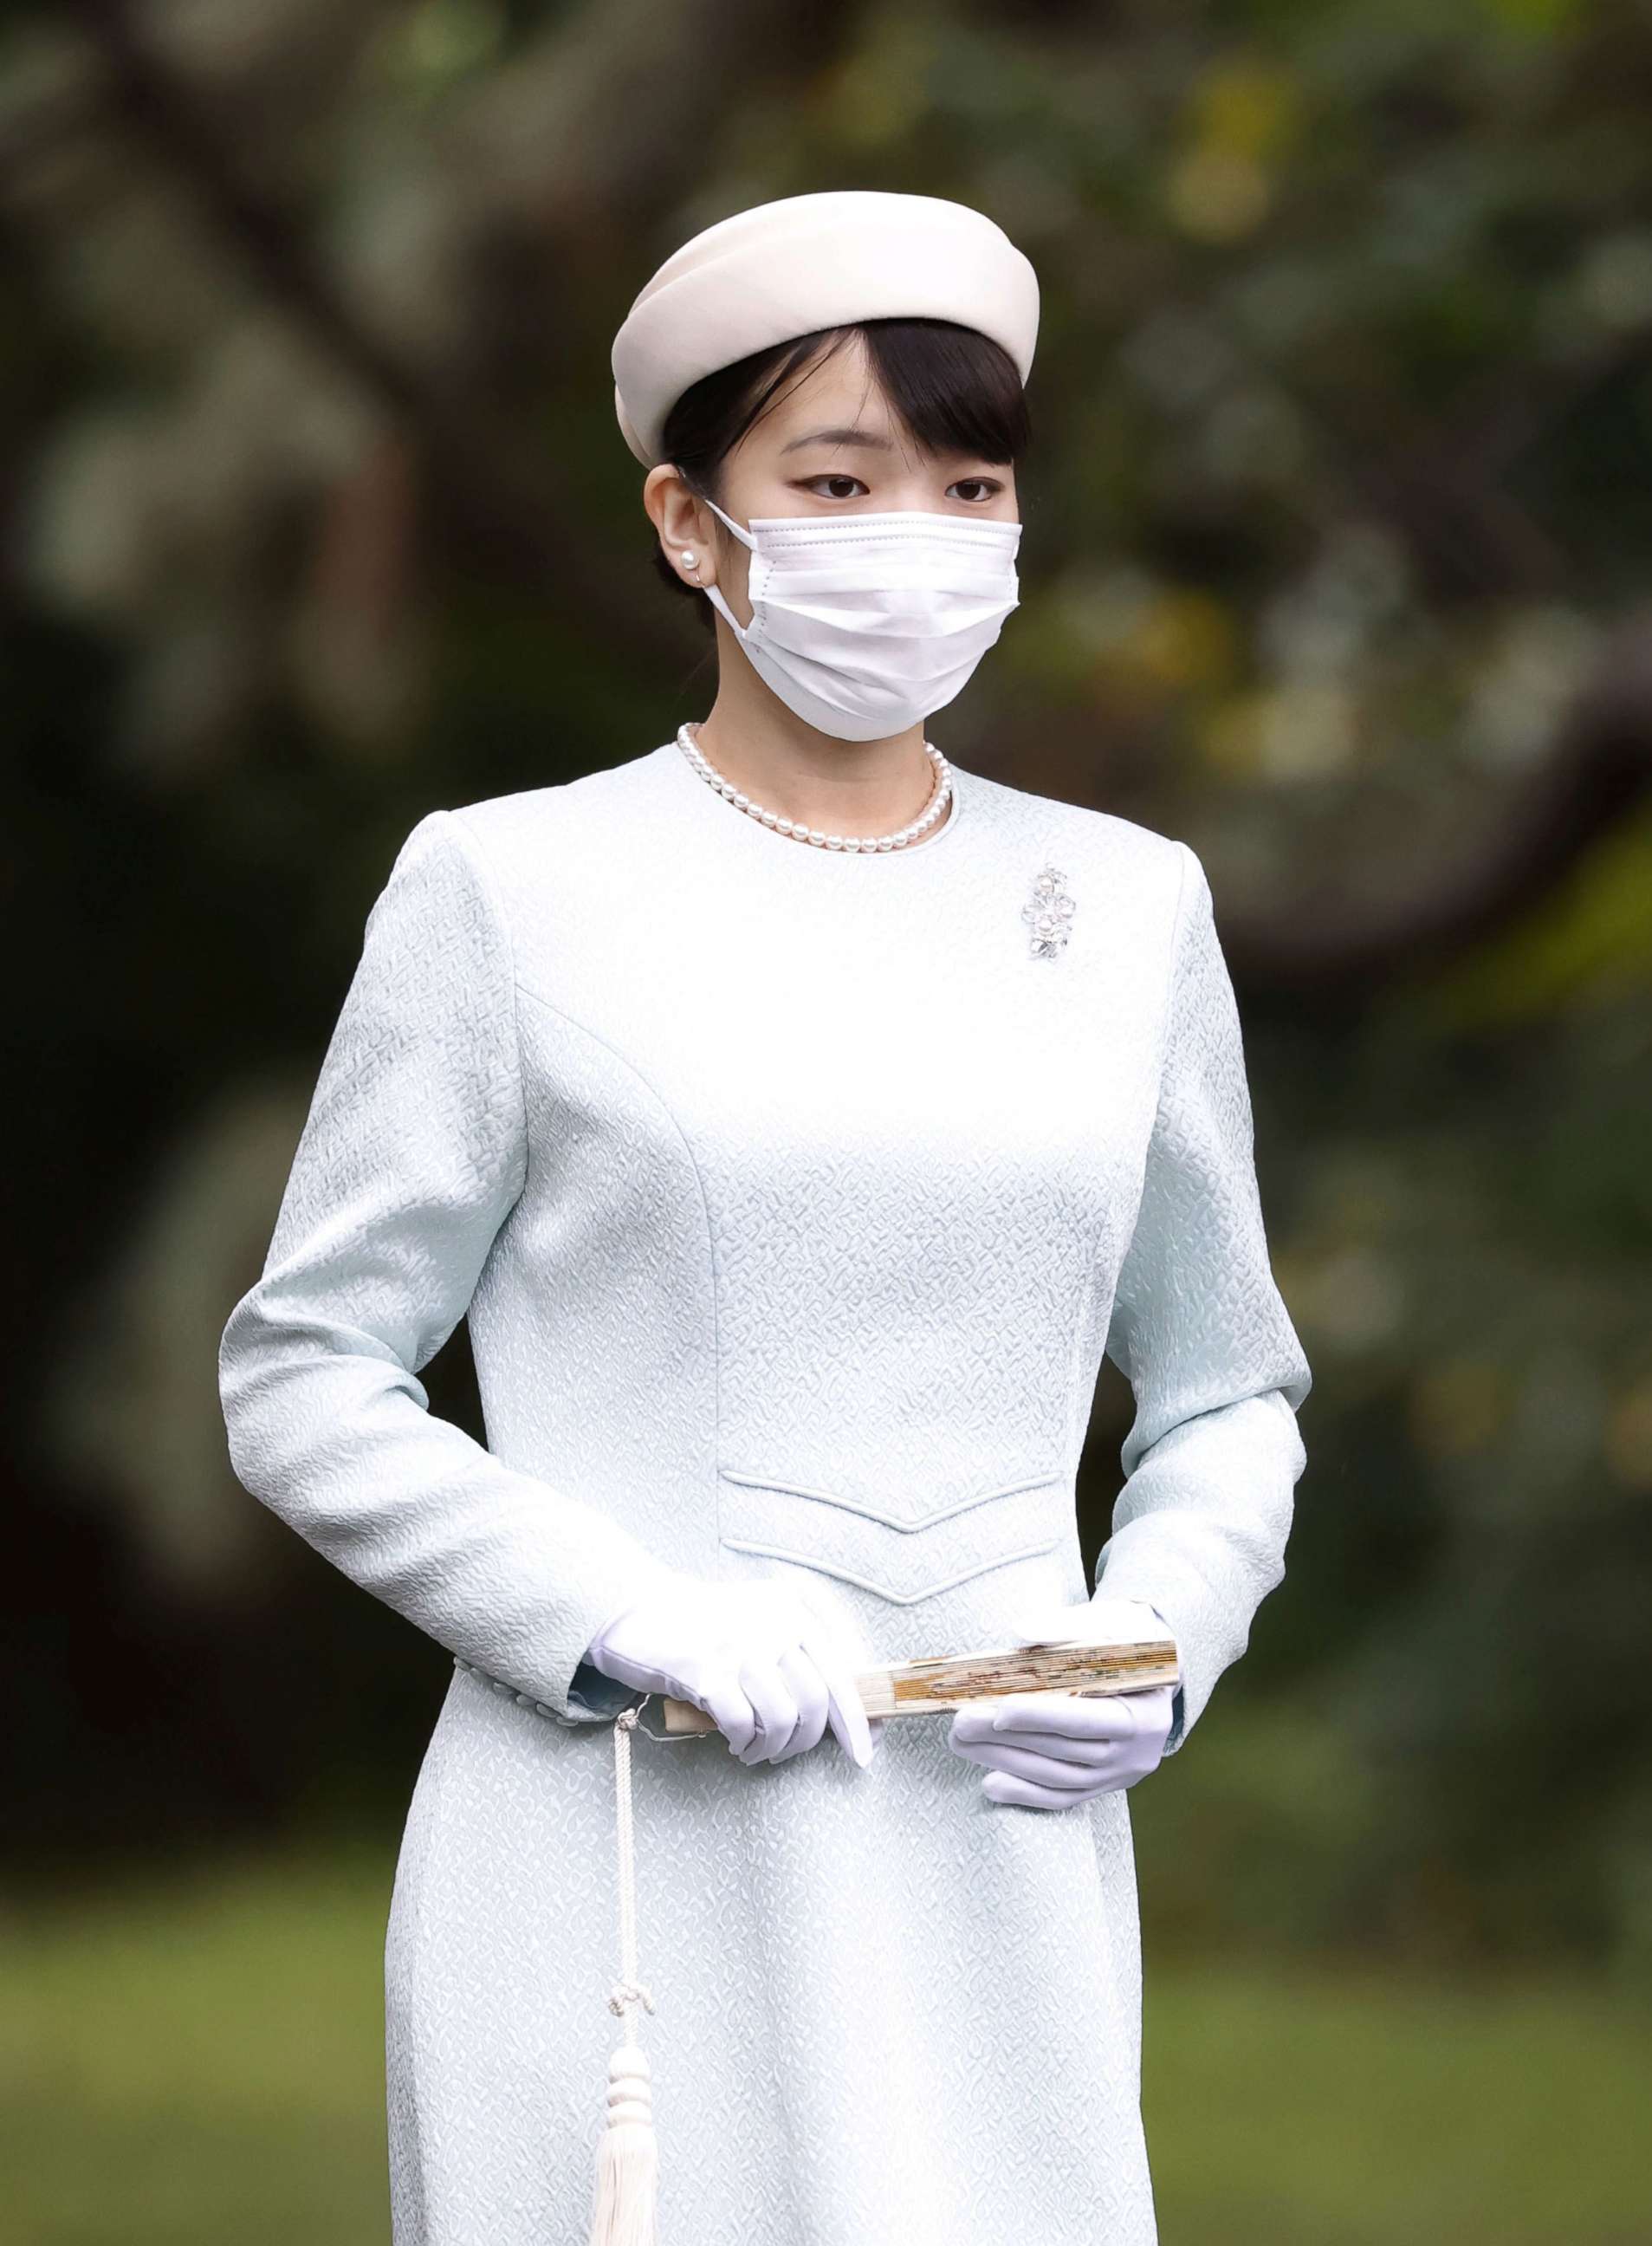 PHOTO:Japan's Princess Mako, the daughter of Crown Prince Akishino and Crown Princess Kiko, walks towards the Three Palace Sanctuaries to pray ahead of her marriage at the Imperial Palace in Tokyo, Oct. 19, 2021.